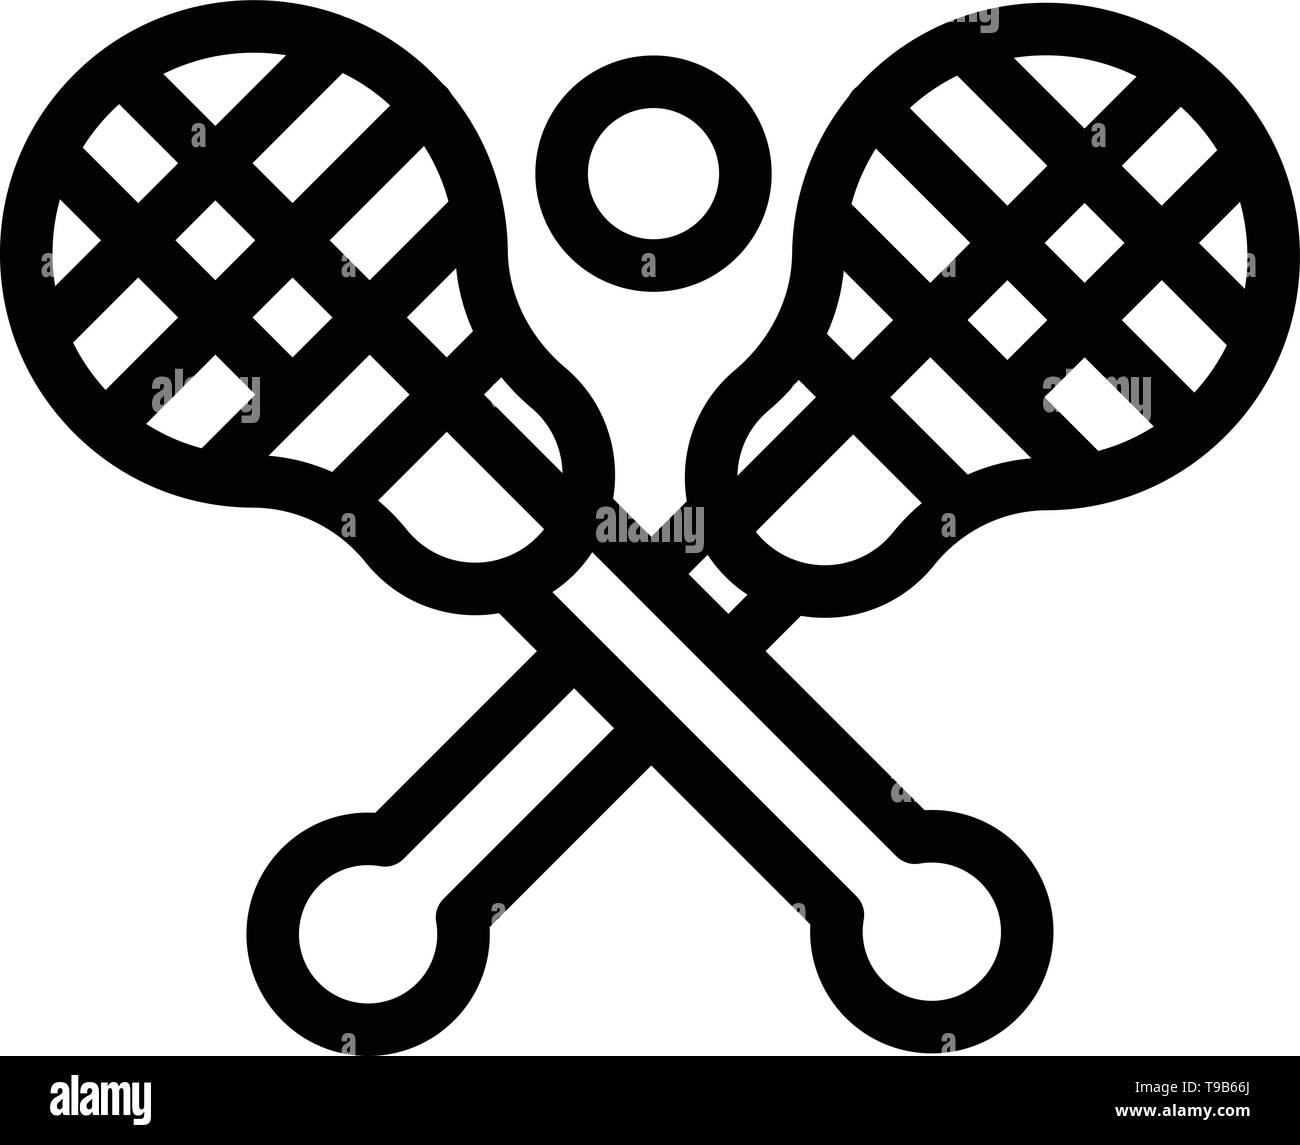 Lacrosse Coach Stock Vector Illustration and Royalty Free Lacrosse Coach  Clipart